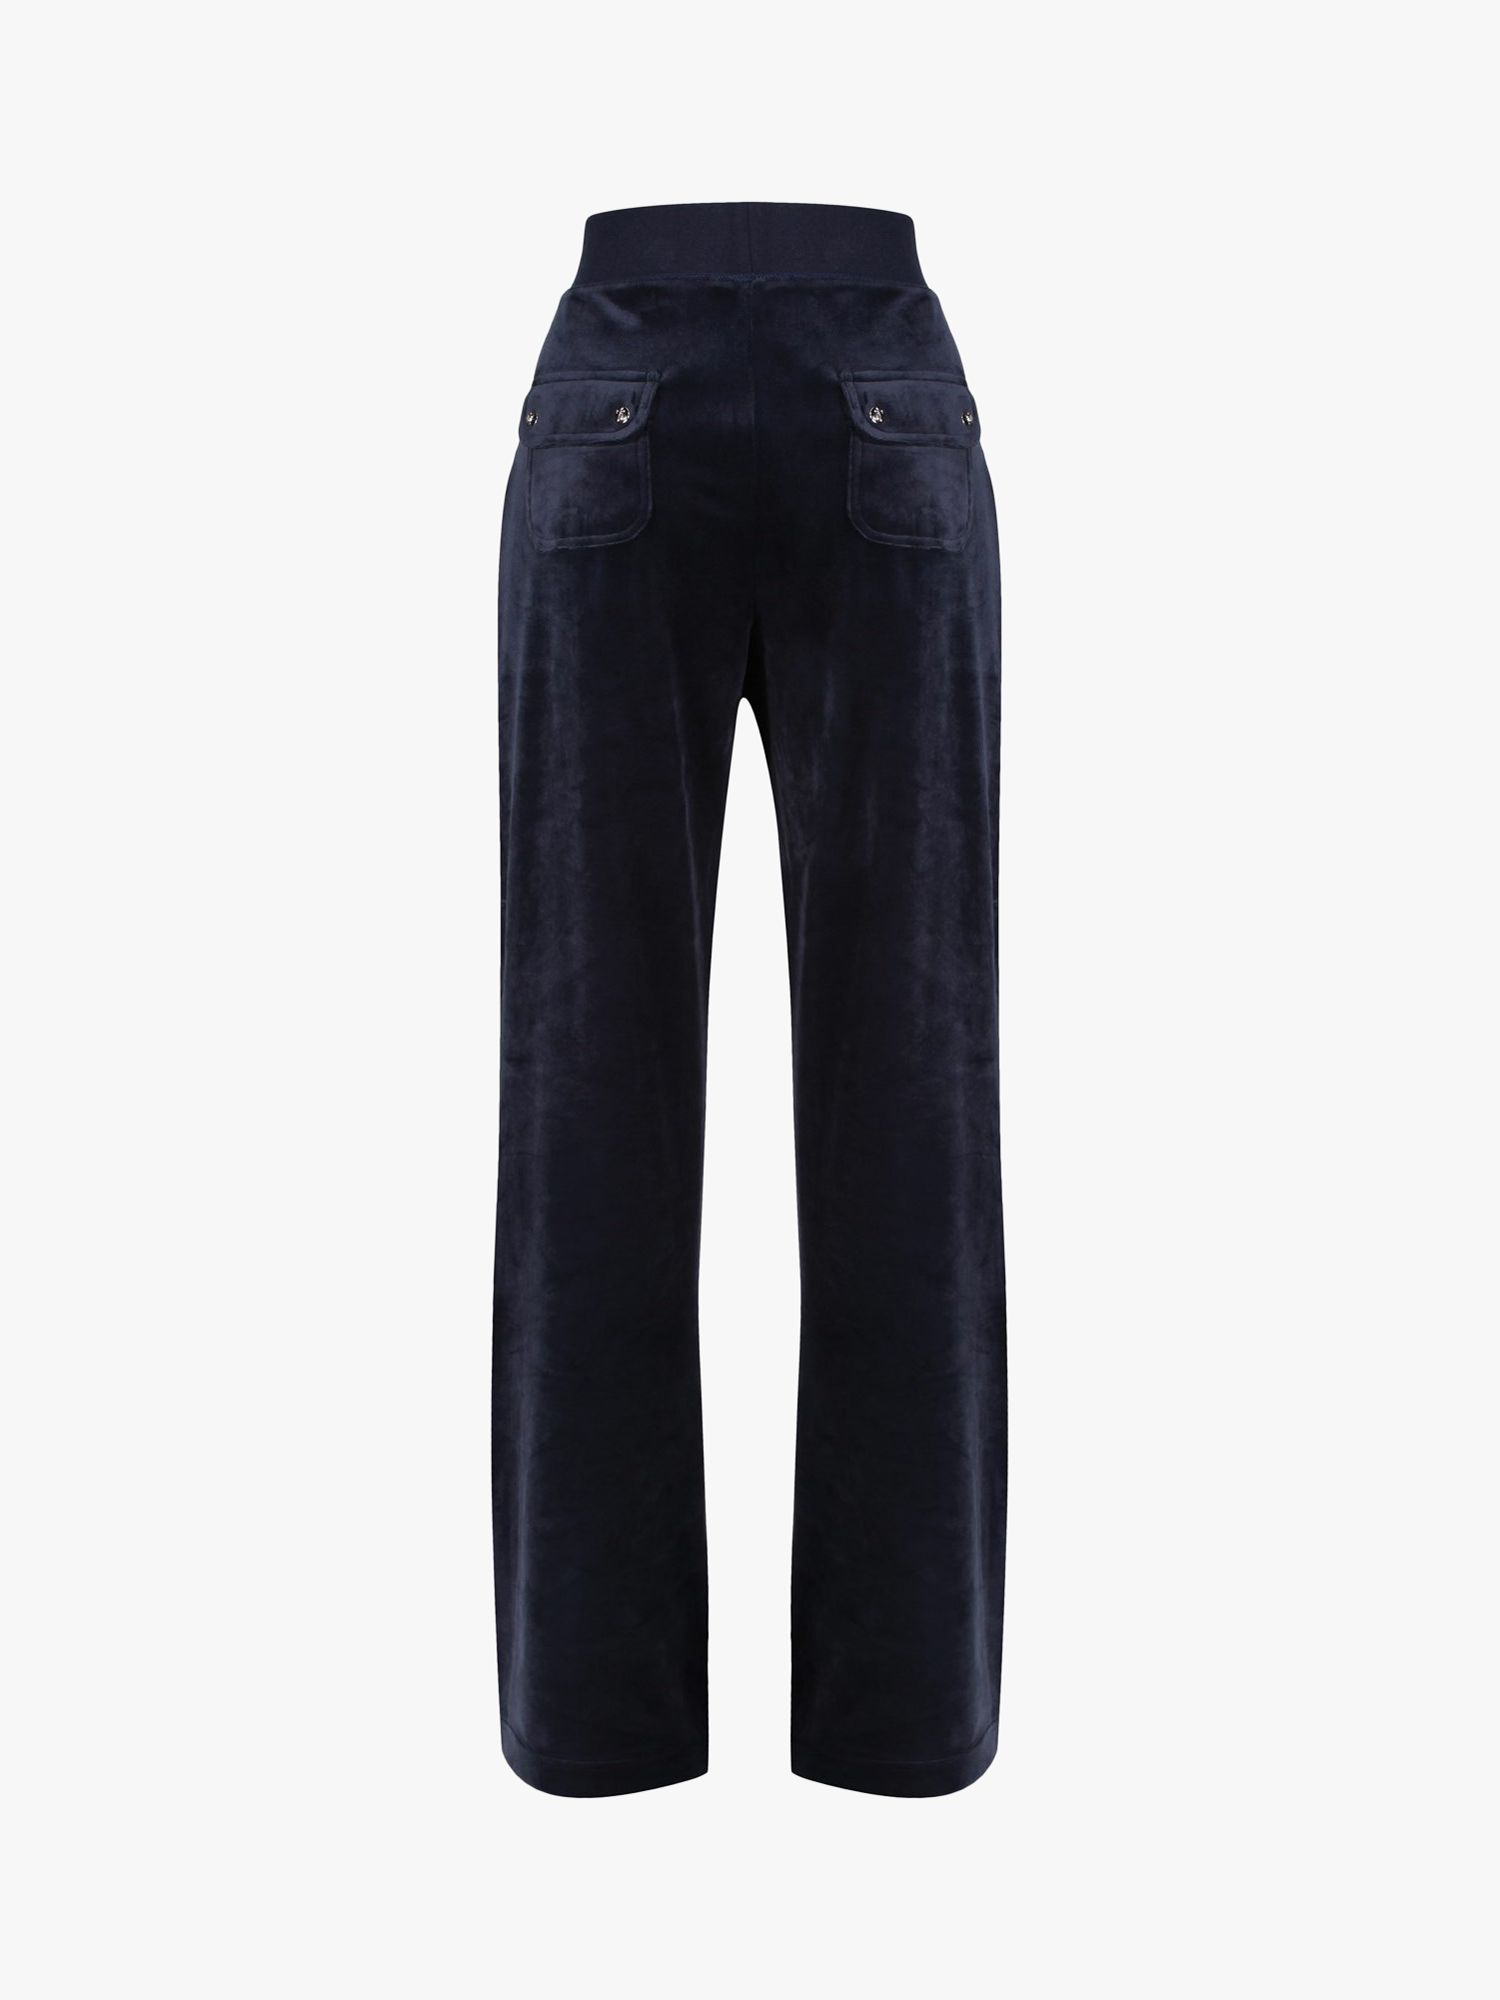 Juicy Couture Del Ray Tracksuit Bottoms, Nightsky, XS